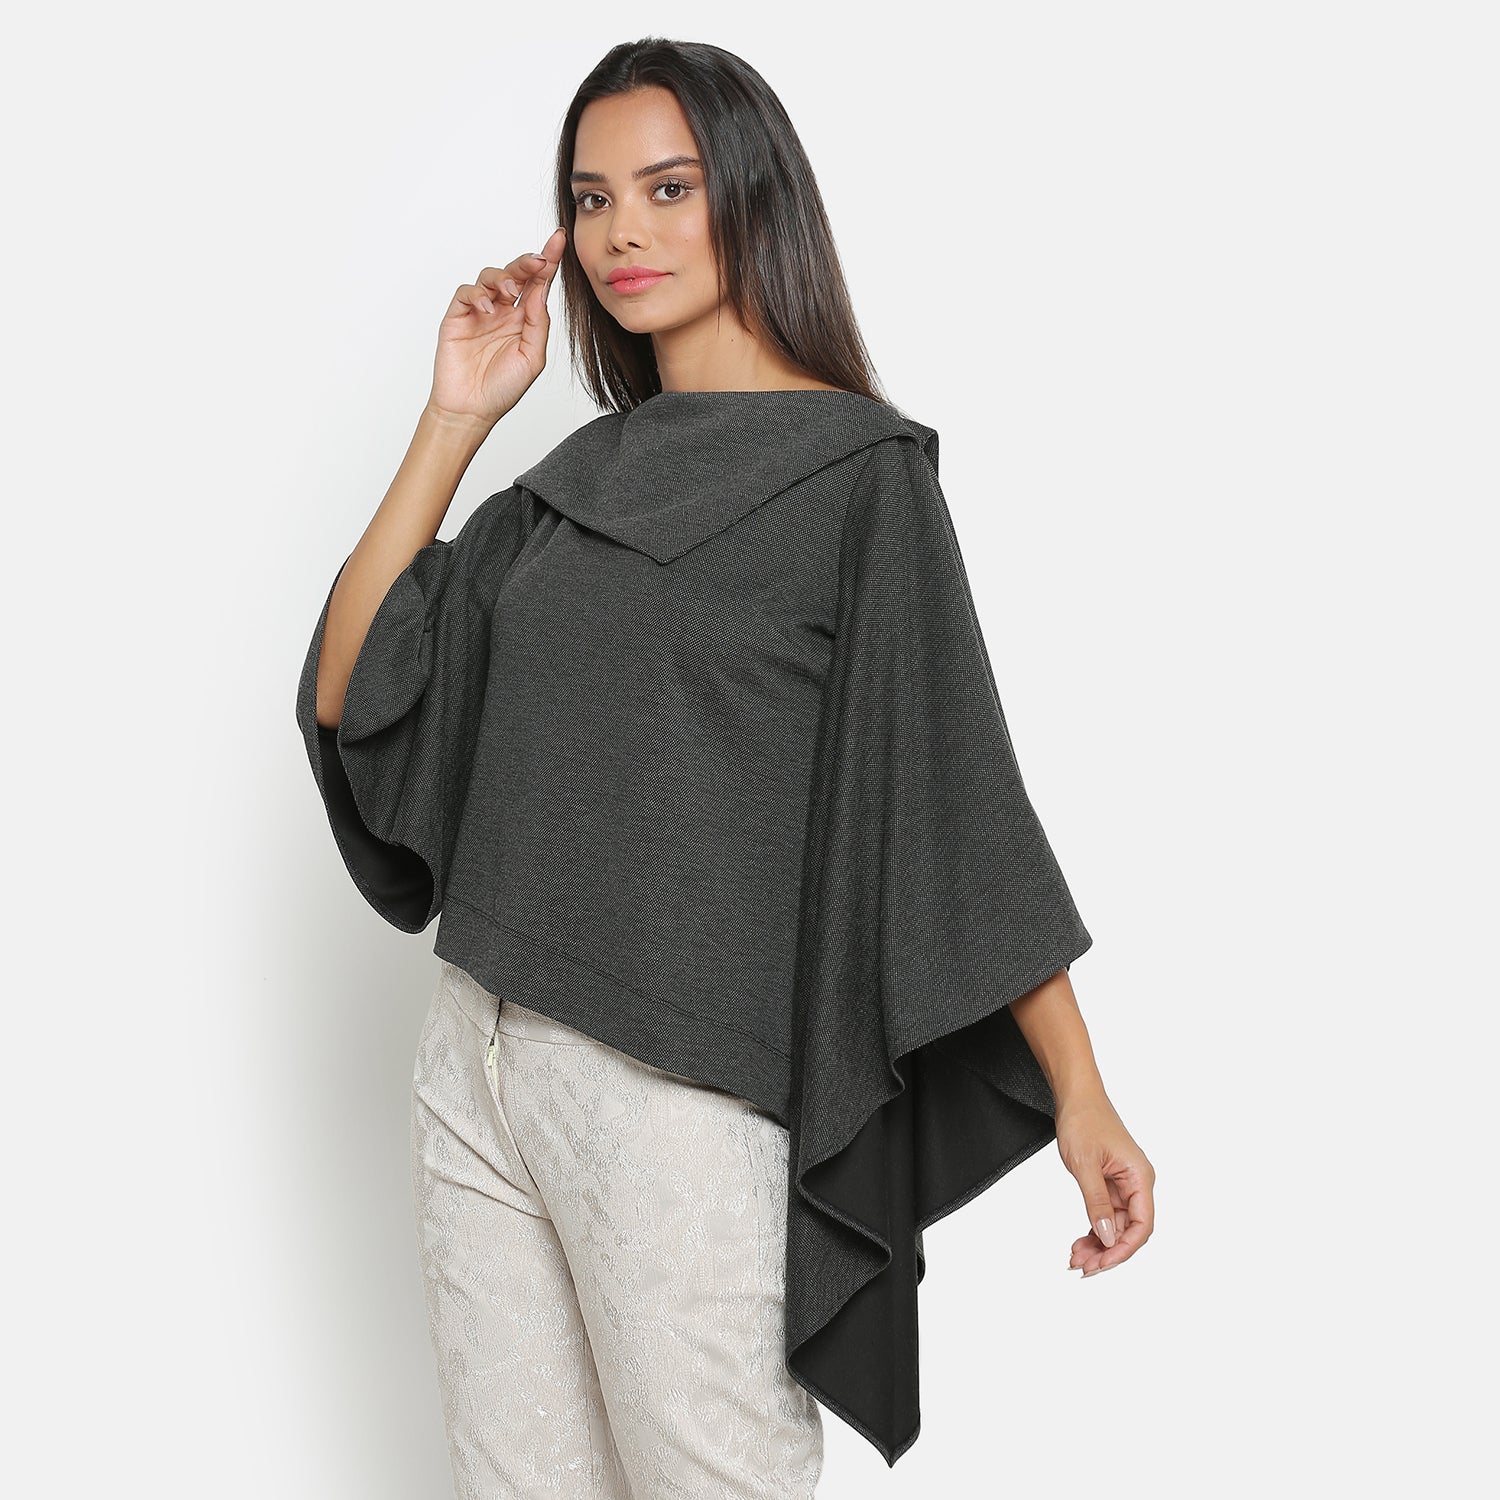 Dark grey knit top with bell sleeves